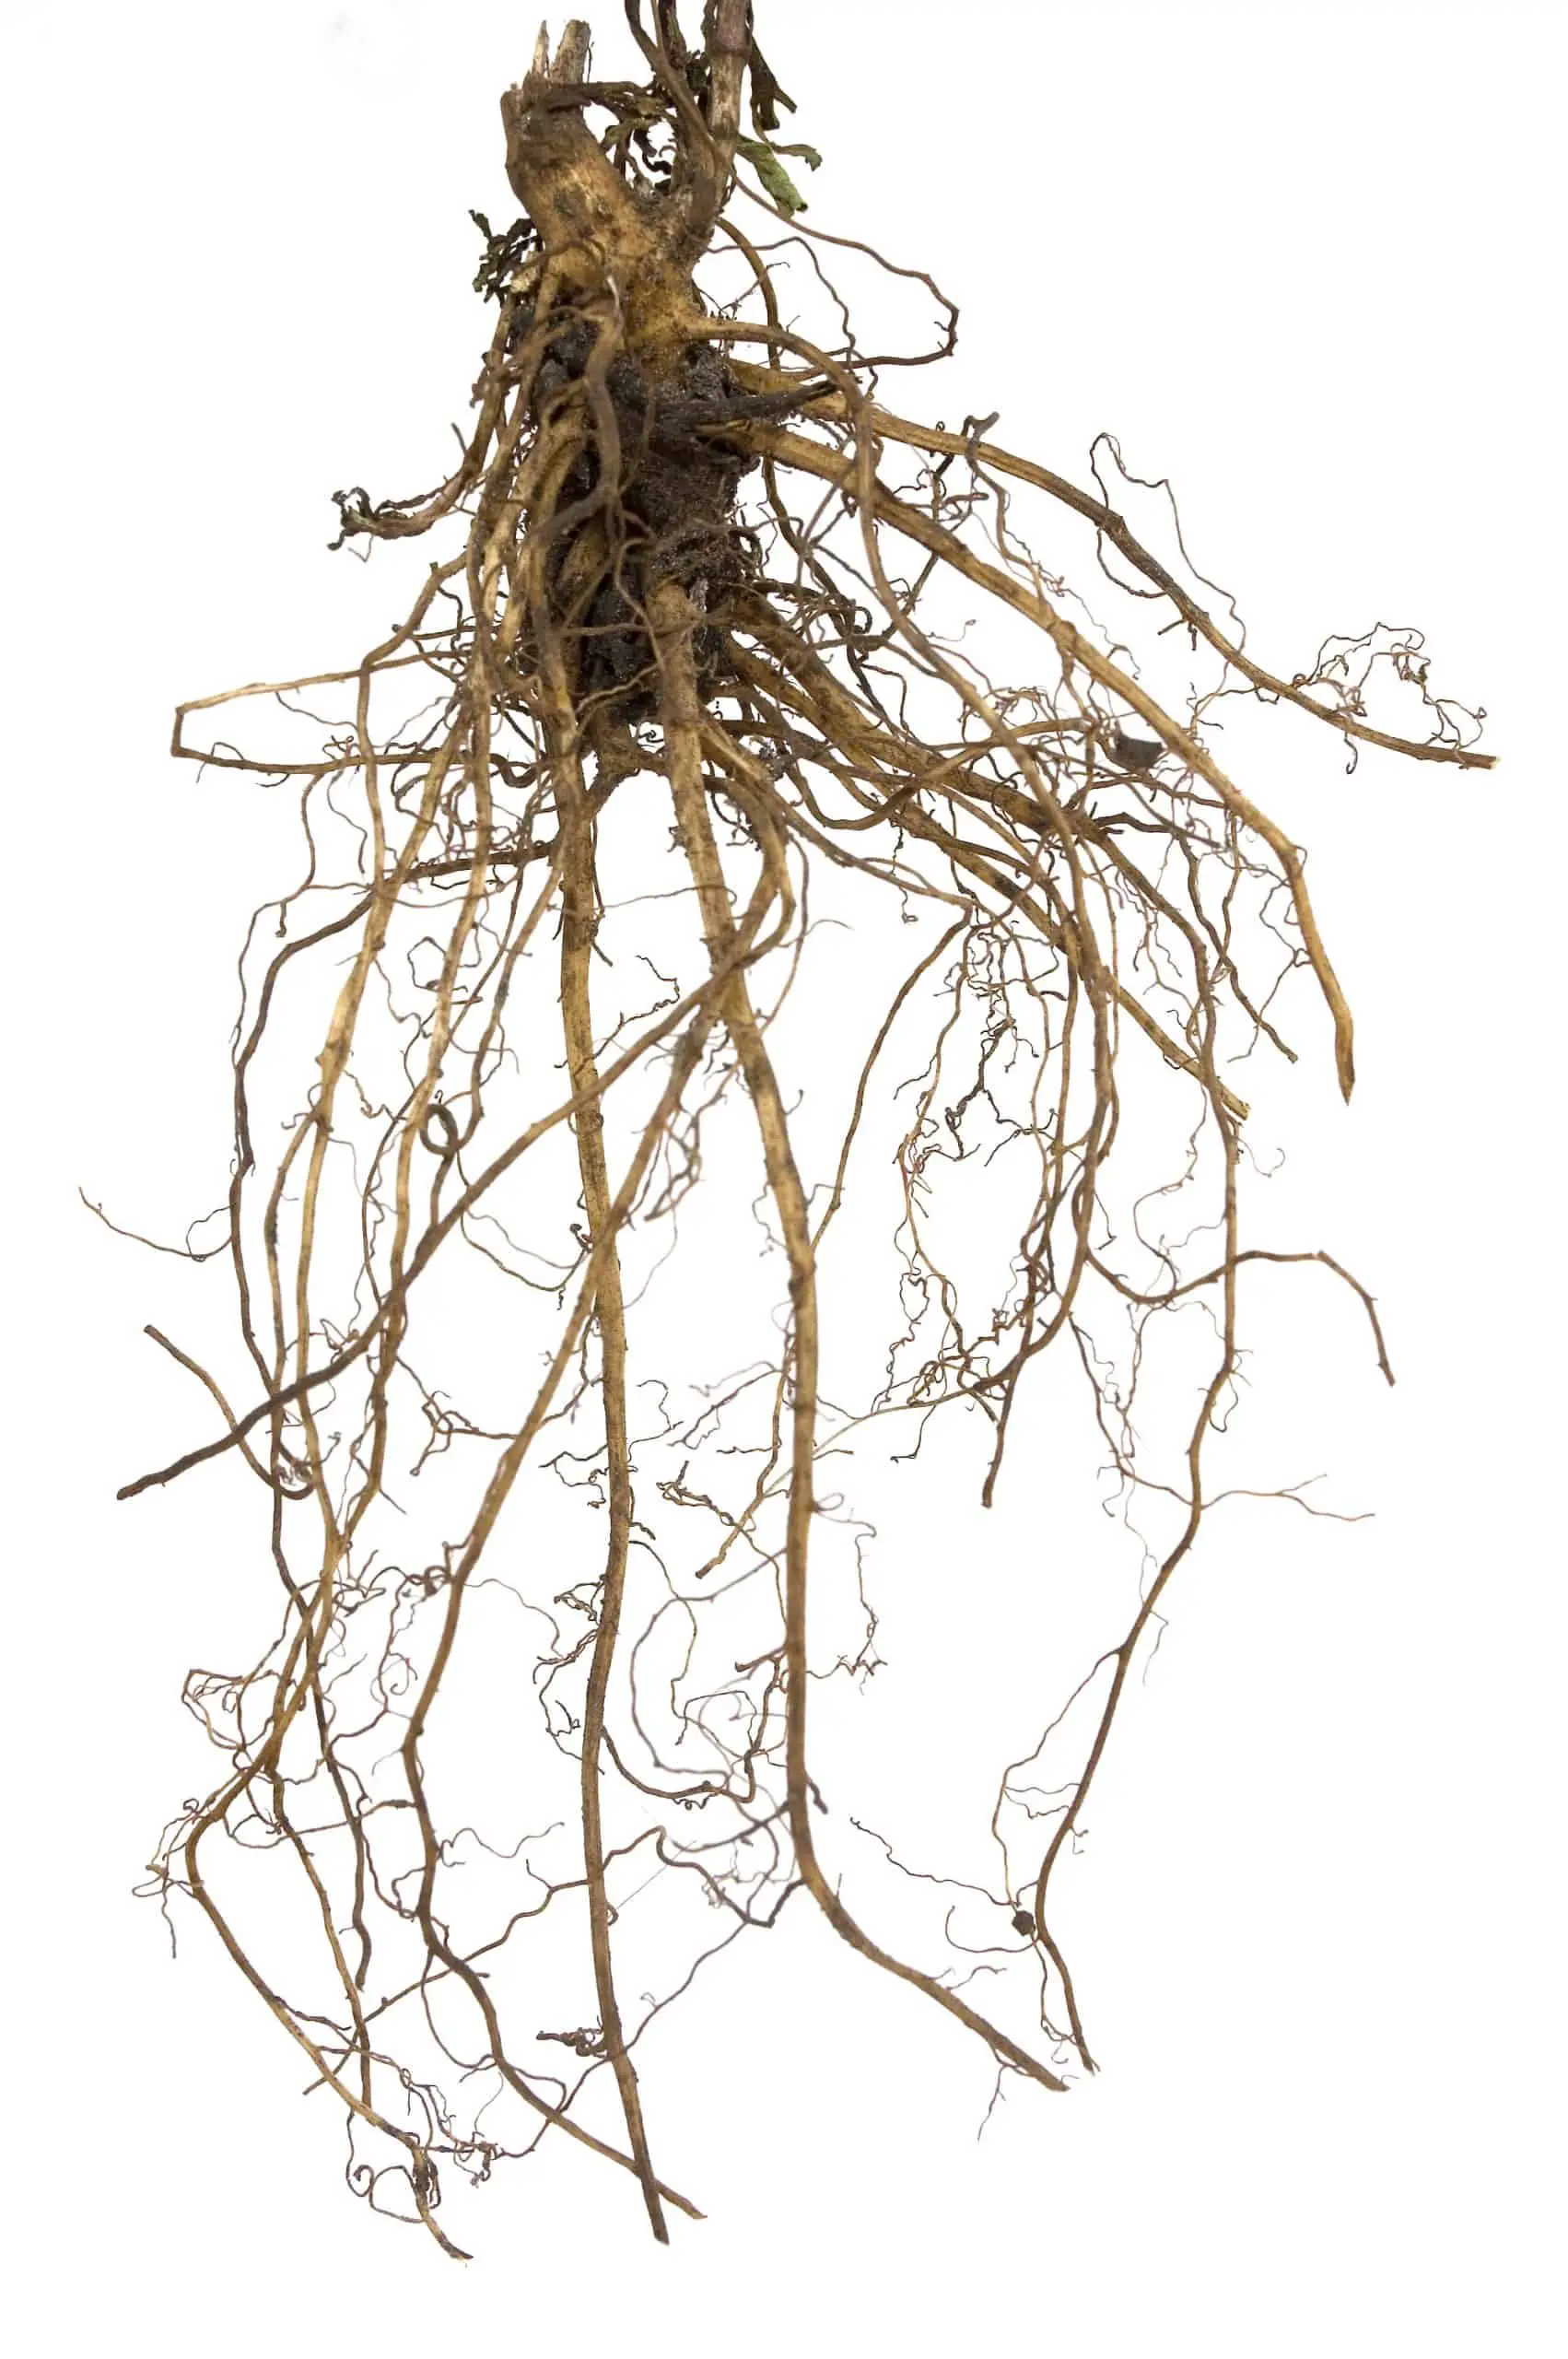 Rhizomes grow deep and long underground and become almost impossble to get rid of